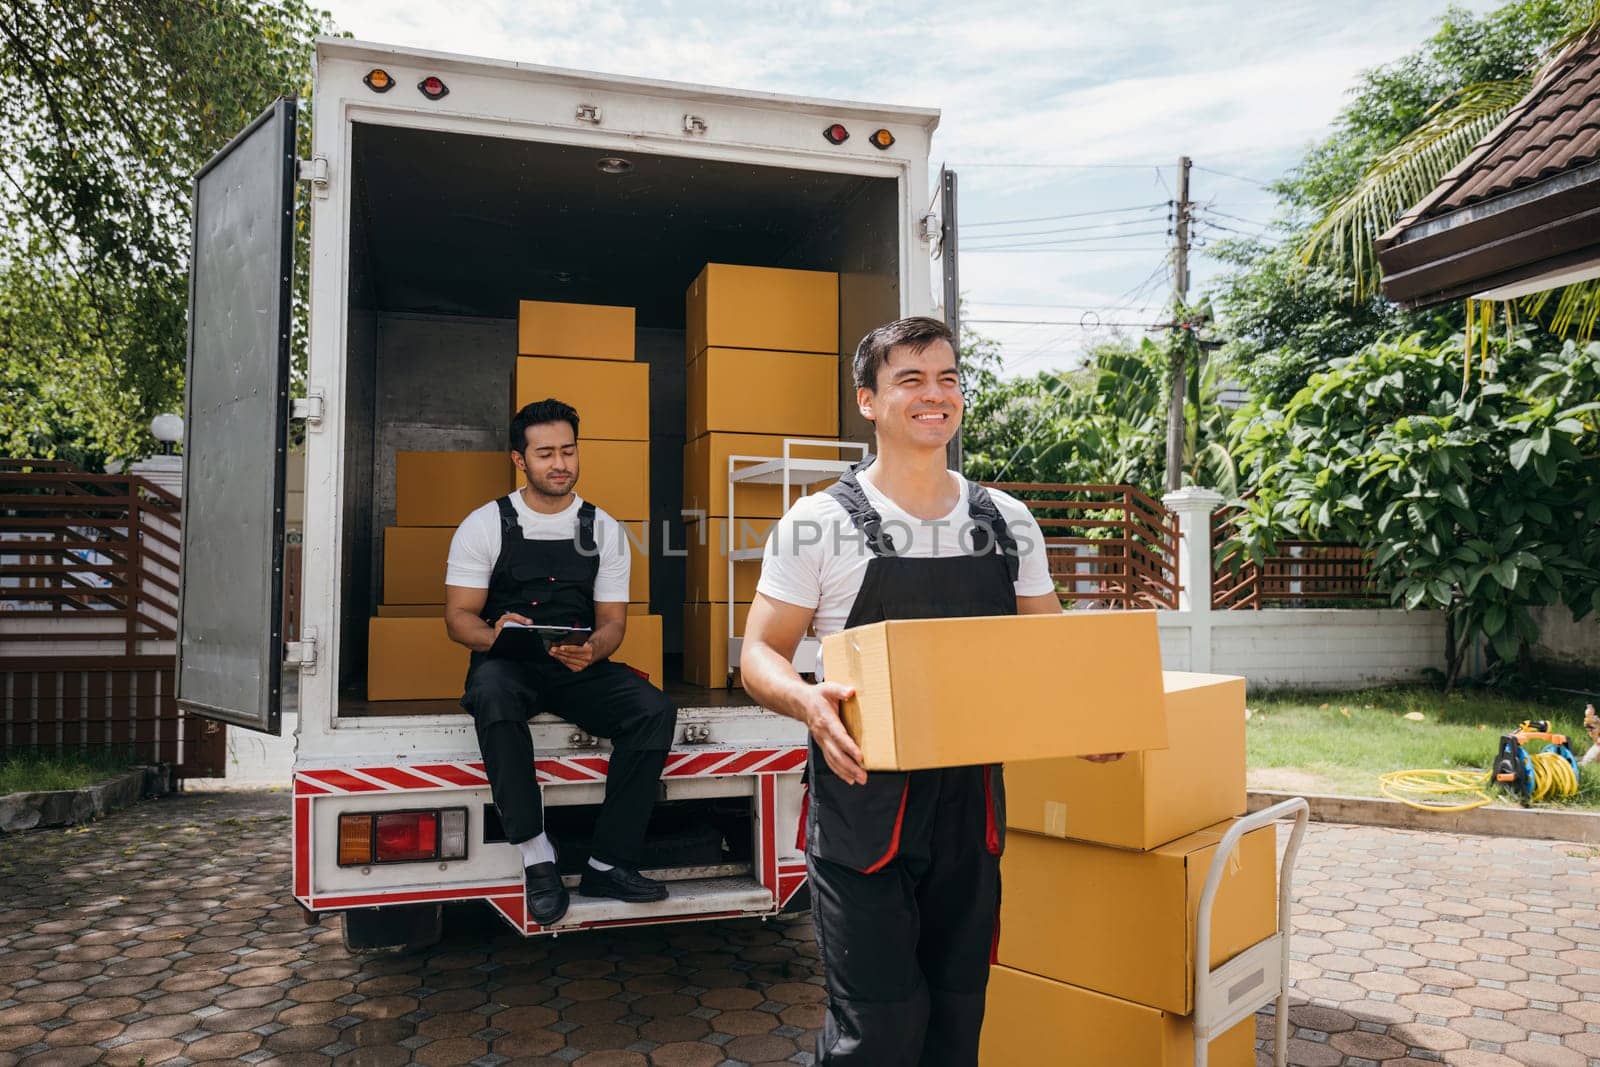 Movers unload boxes from a truck outdoors. Delivery service workers cooperate in relocation service. Teamwork among colleagues. Smiling employees carrying boxes. relocation cooperation Moving Day by Sorapop